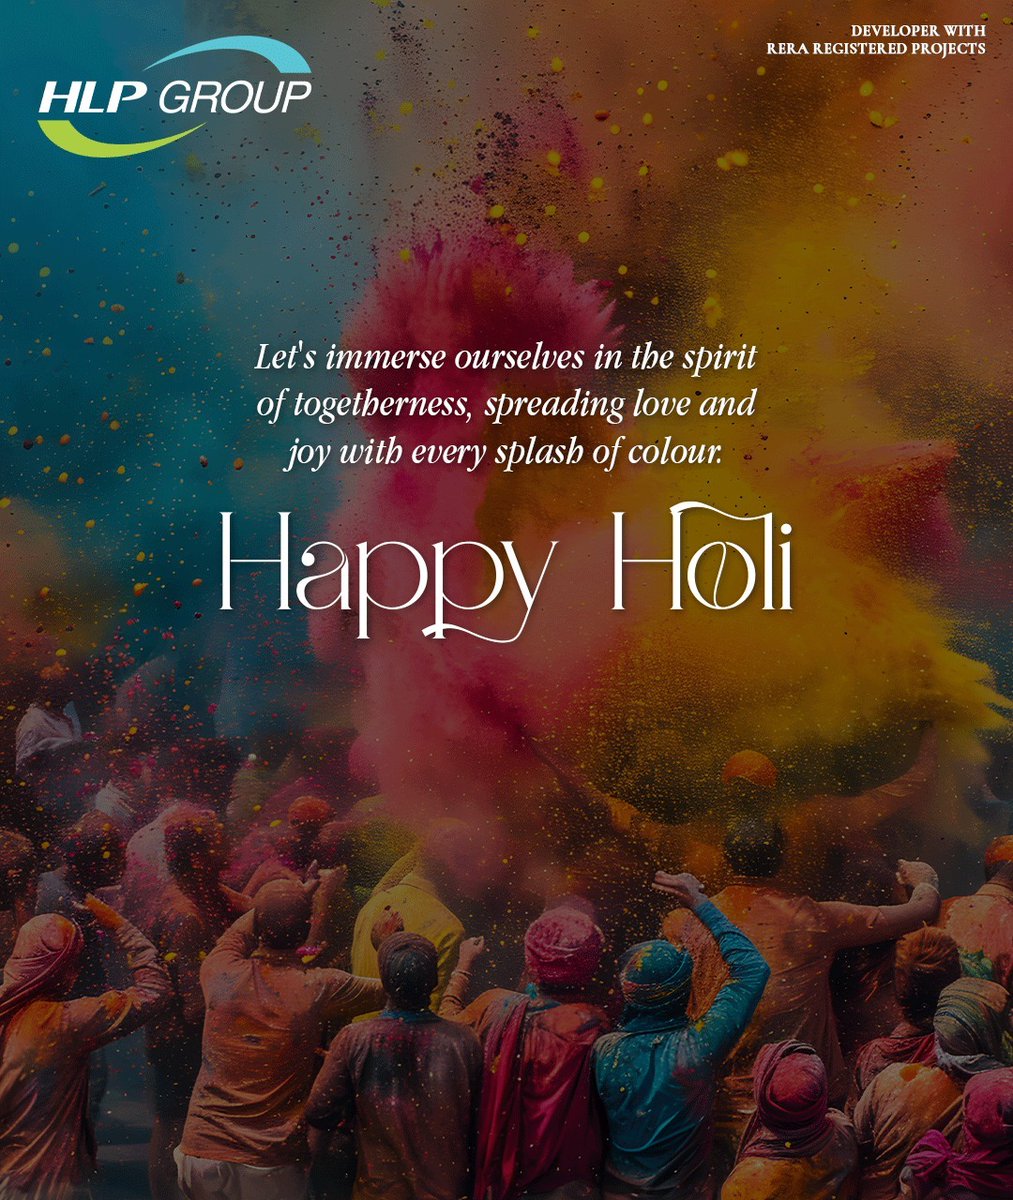 As you celebrate Holi, may the vibrant colours uplift your spirits, wipe away sorrows, and fill your world with laughter and love.

Happy Holi

#HLPGroup #HLPSocialSquare #HLPPalmillas #HLPGalleria #Togetherness #Colours #Joy #Happiness #Laughter #Love  #SplashOfColours